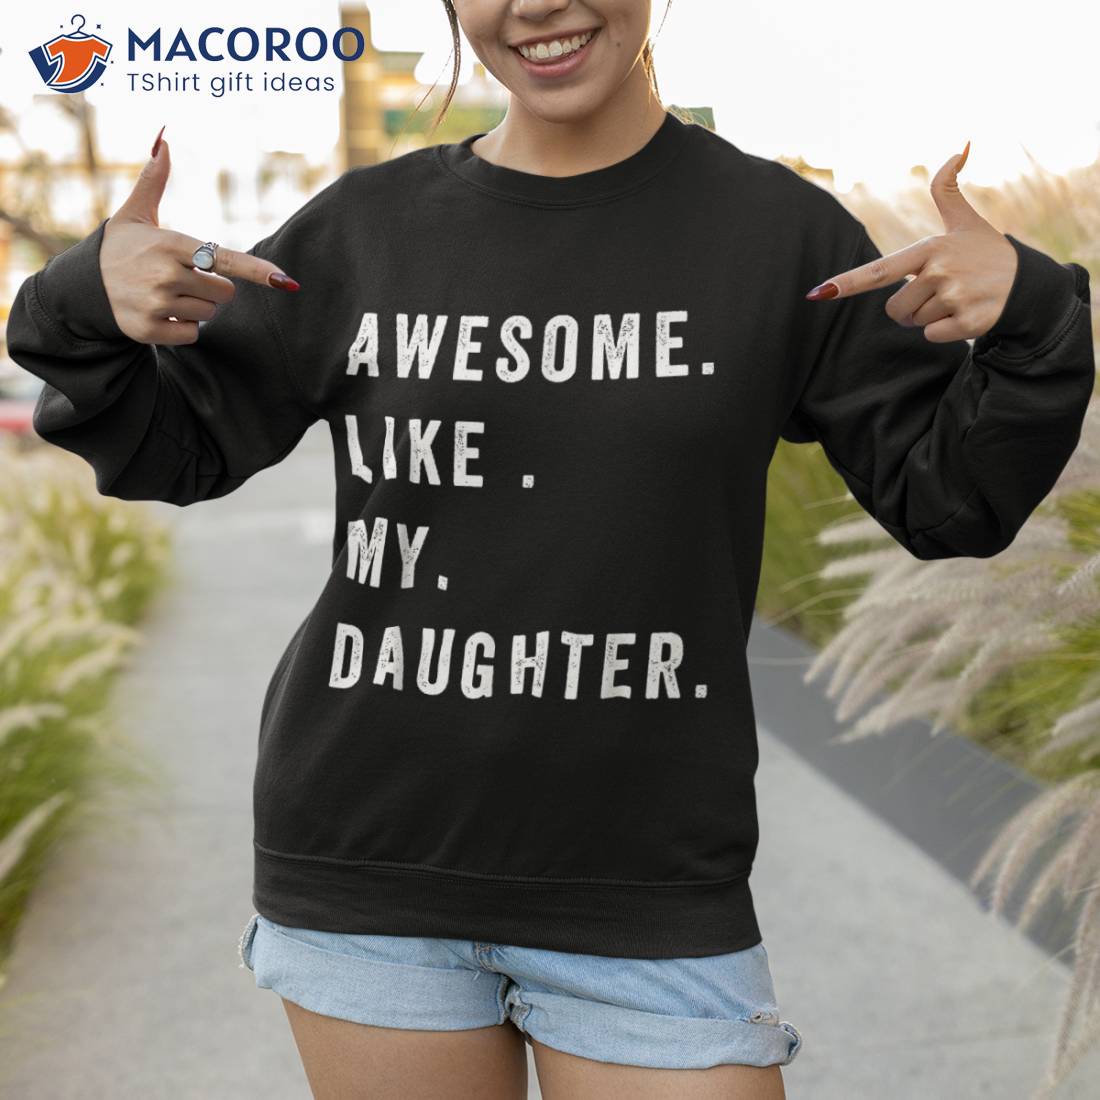 Awesome Like My Daughters Fathers Day Funny Family Humor Shirt Sweatshirt